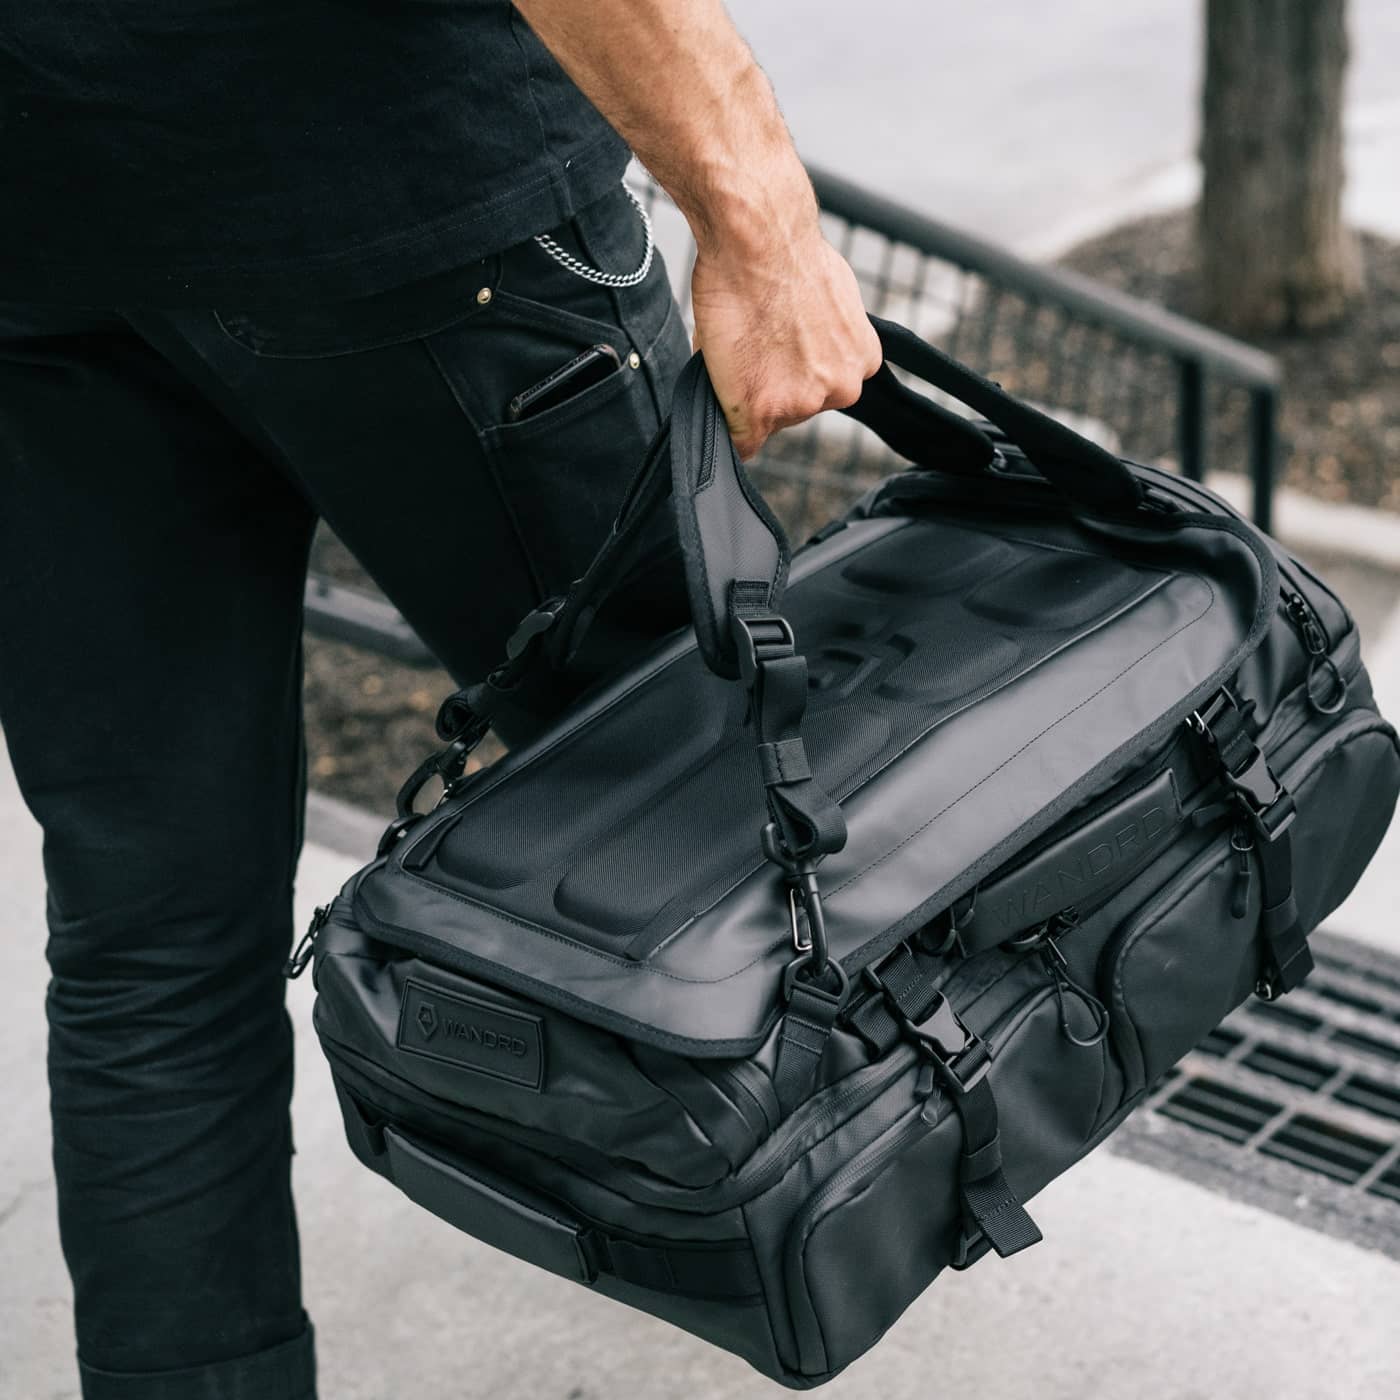 Best travel backpack carry-on